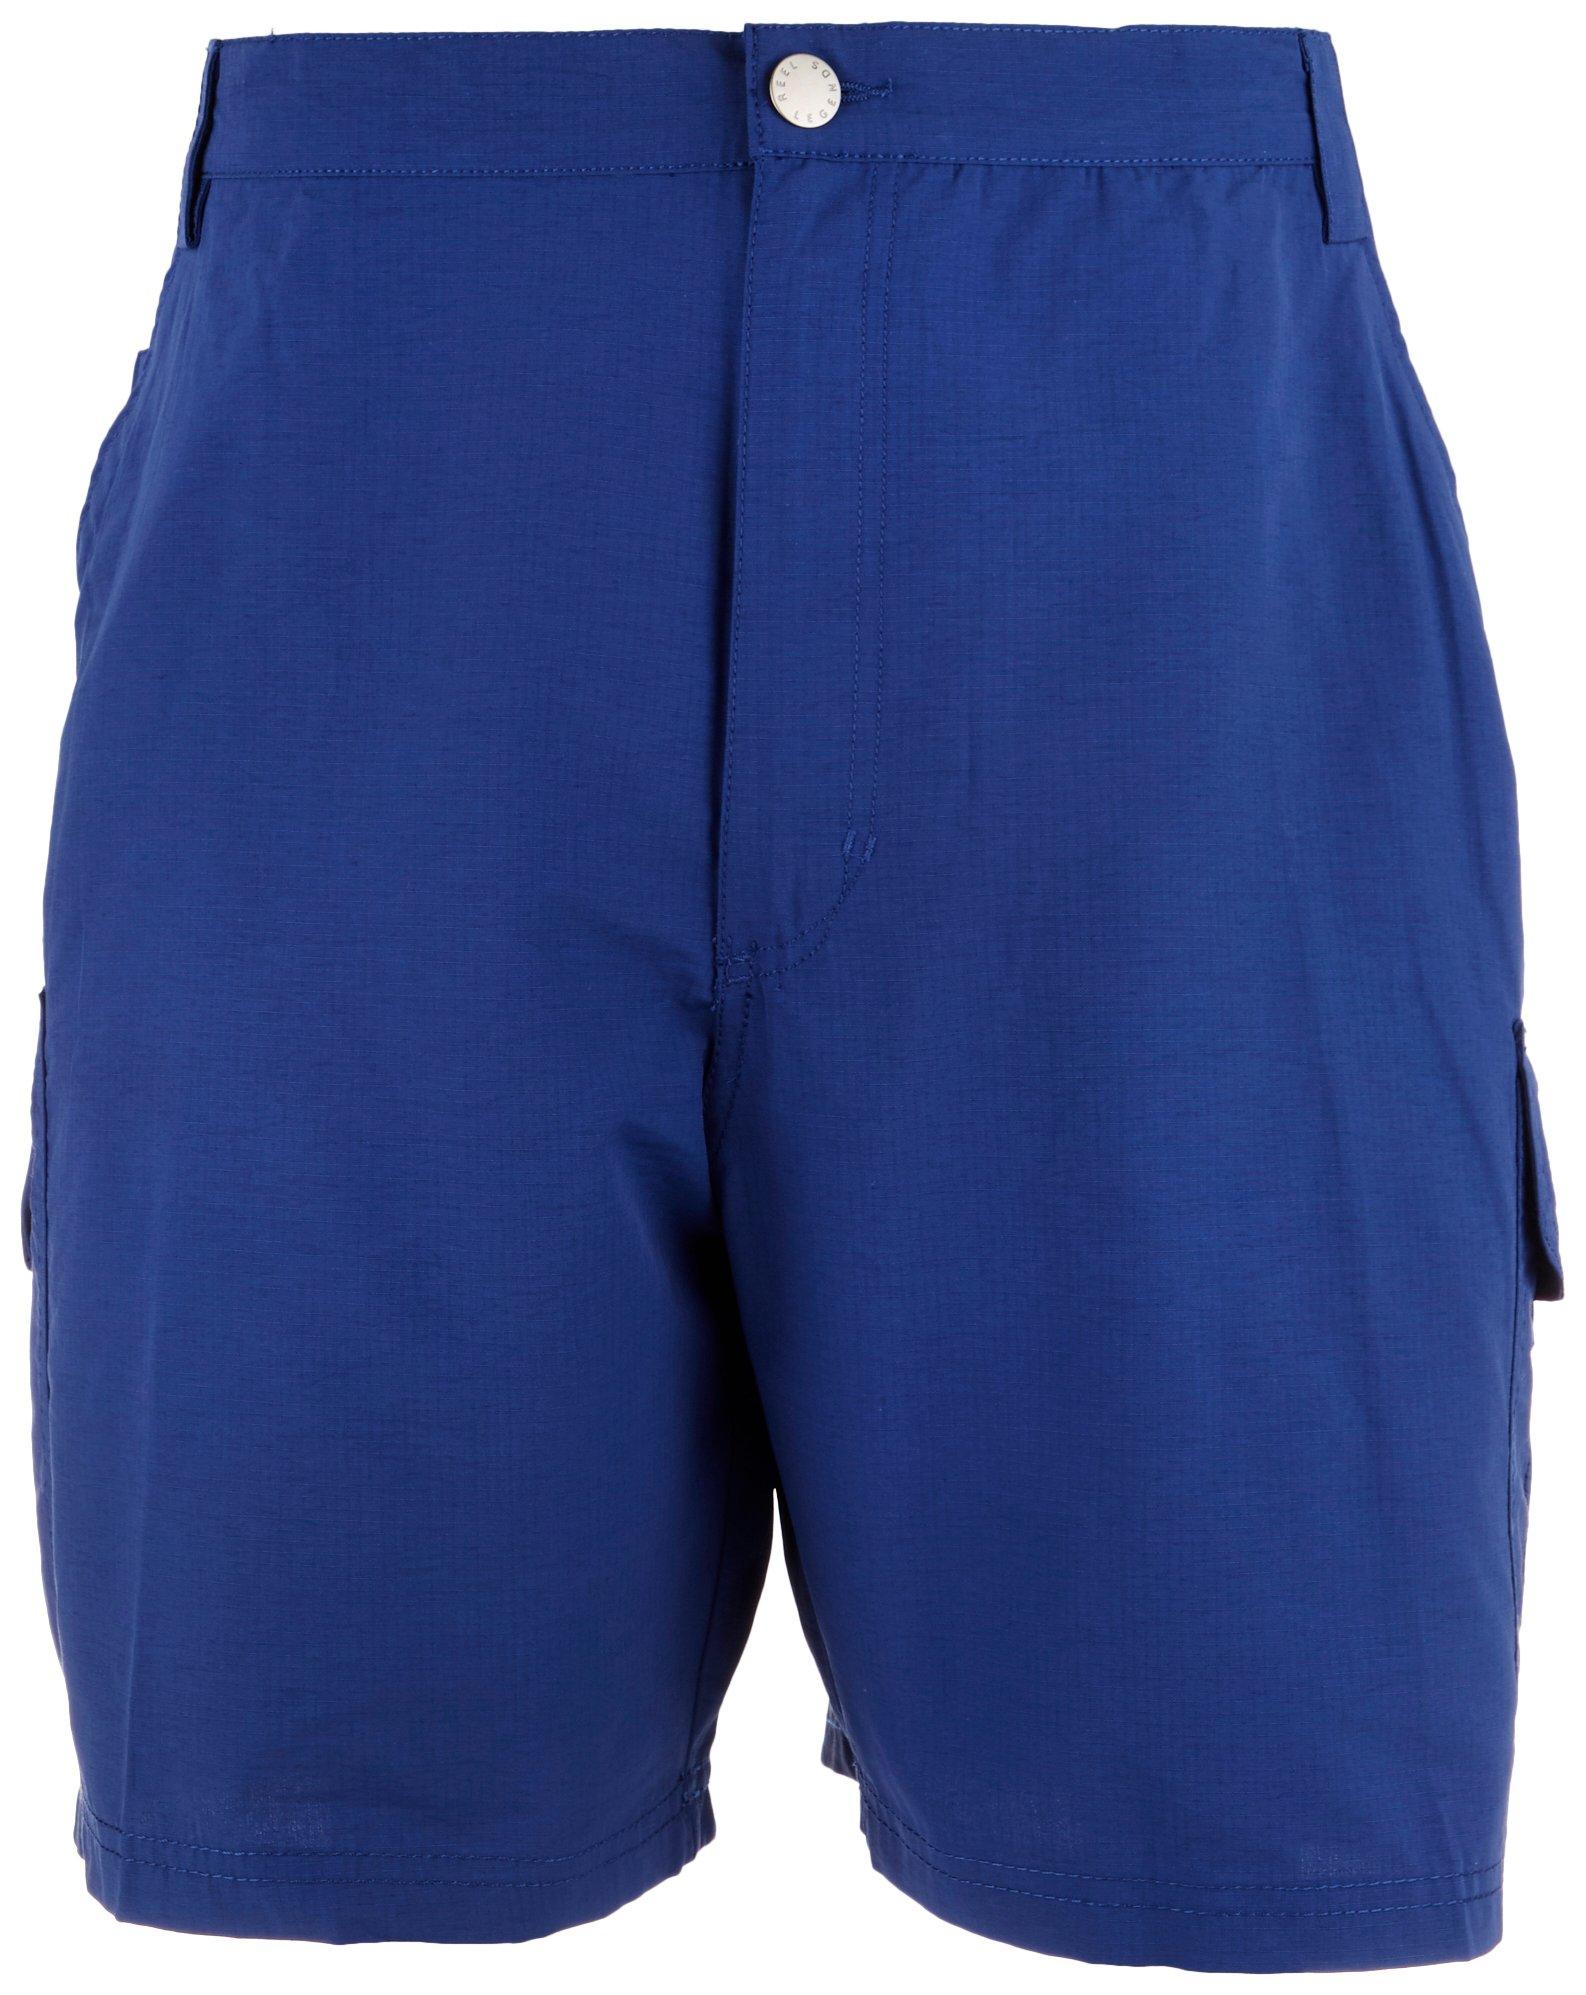 Mens Solid Tarpon Quick Dry 7 in. Cargo Shorts